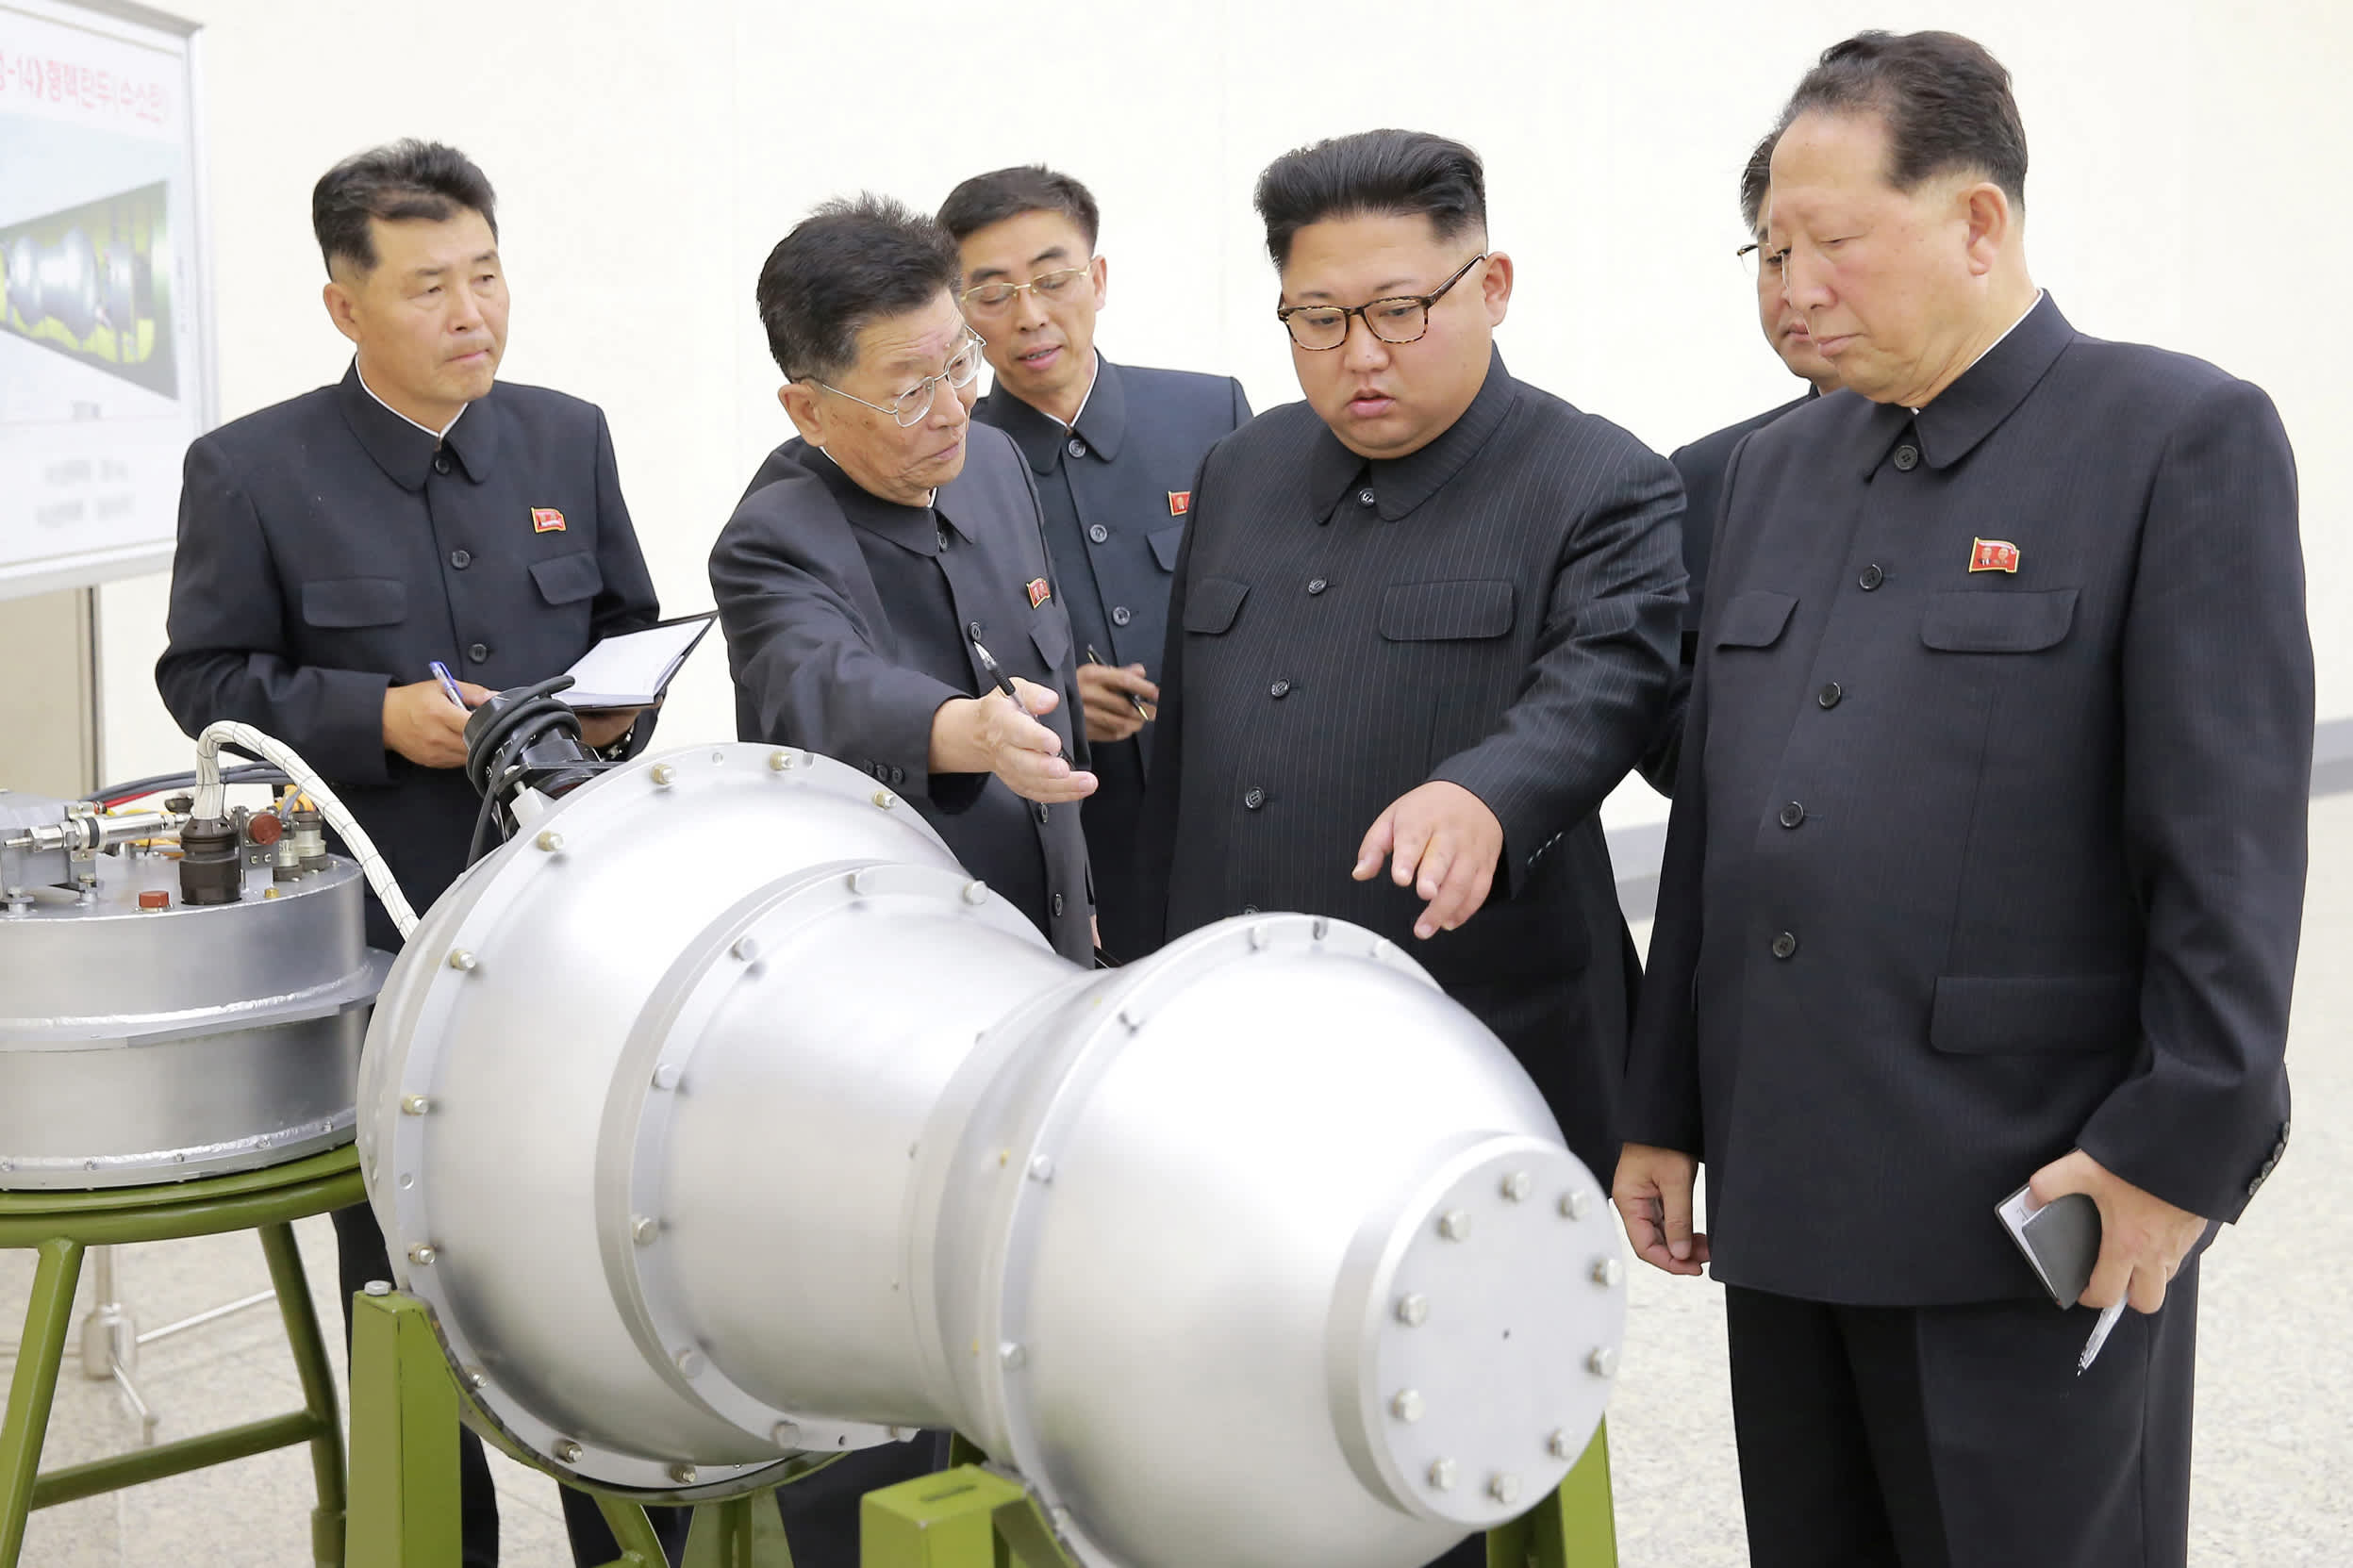 North Korean leader Kim Jong Un provides guidance on a nuclear weapons program in this undated photo released by North Korea's Korean Central News Agency (KCNA) in Pyongyang September 3, 2017.   KCNA/VIA REUTERS 